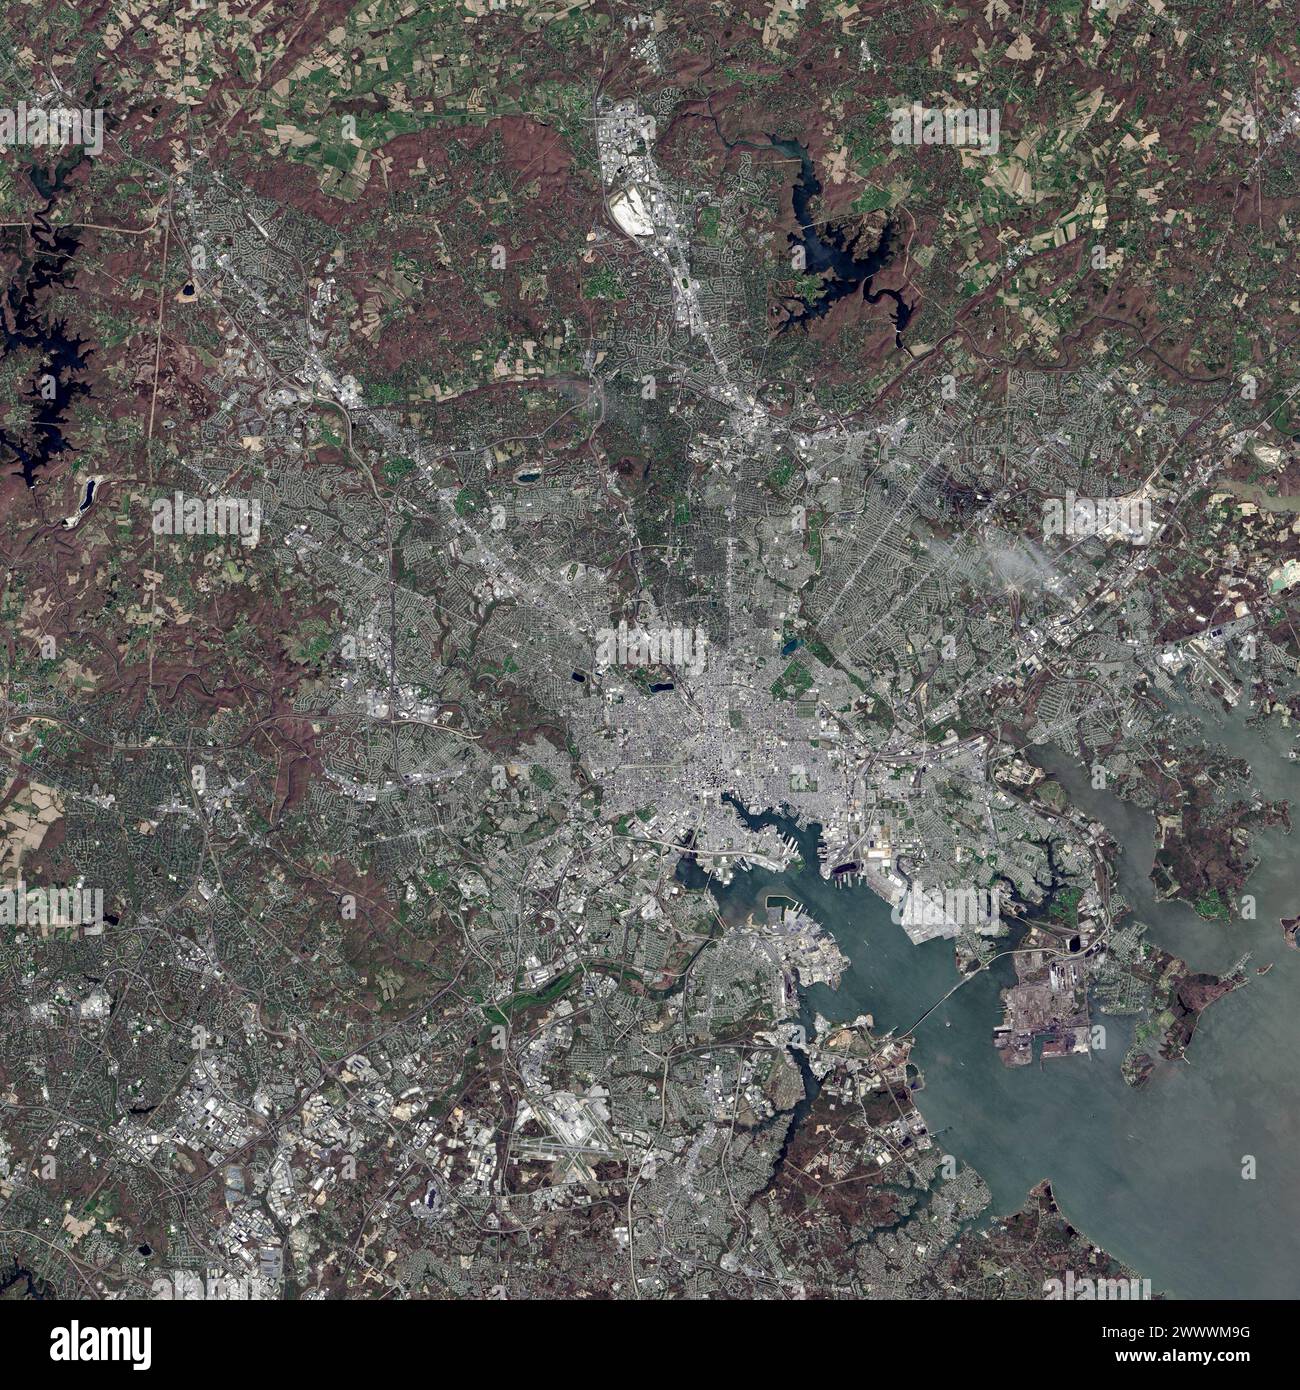 On 24 April 2014, the Operational Land Imager on Landsat 8 captured this view of Baltimore, and its harbour. The Francis Scott Key Bridge can be seen in the bottom right spanning the harbour entrance. Francis Scott Key Bridge, Baltimore. On 26 March 2024 c.1:27 EDT, the entirety of the through truss bridge collapsed after the Singaporean container ship Dali collided with a support pillar. An unknown number of vehicles and construction workers were on the bridge at the time of the collision and subsequent collapse.  Credit: NASA / USGS / Alamy Live News via Digitaleye Stock Photo